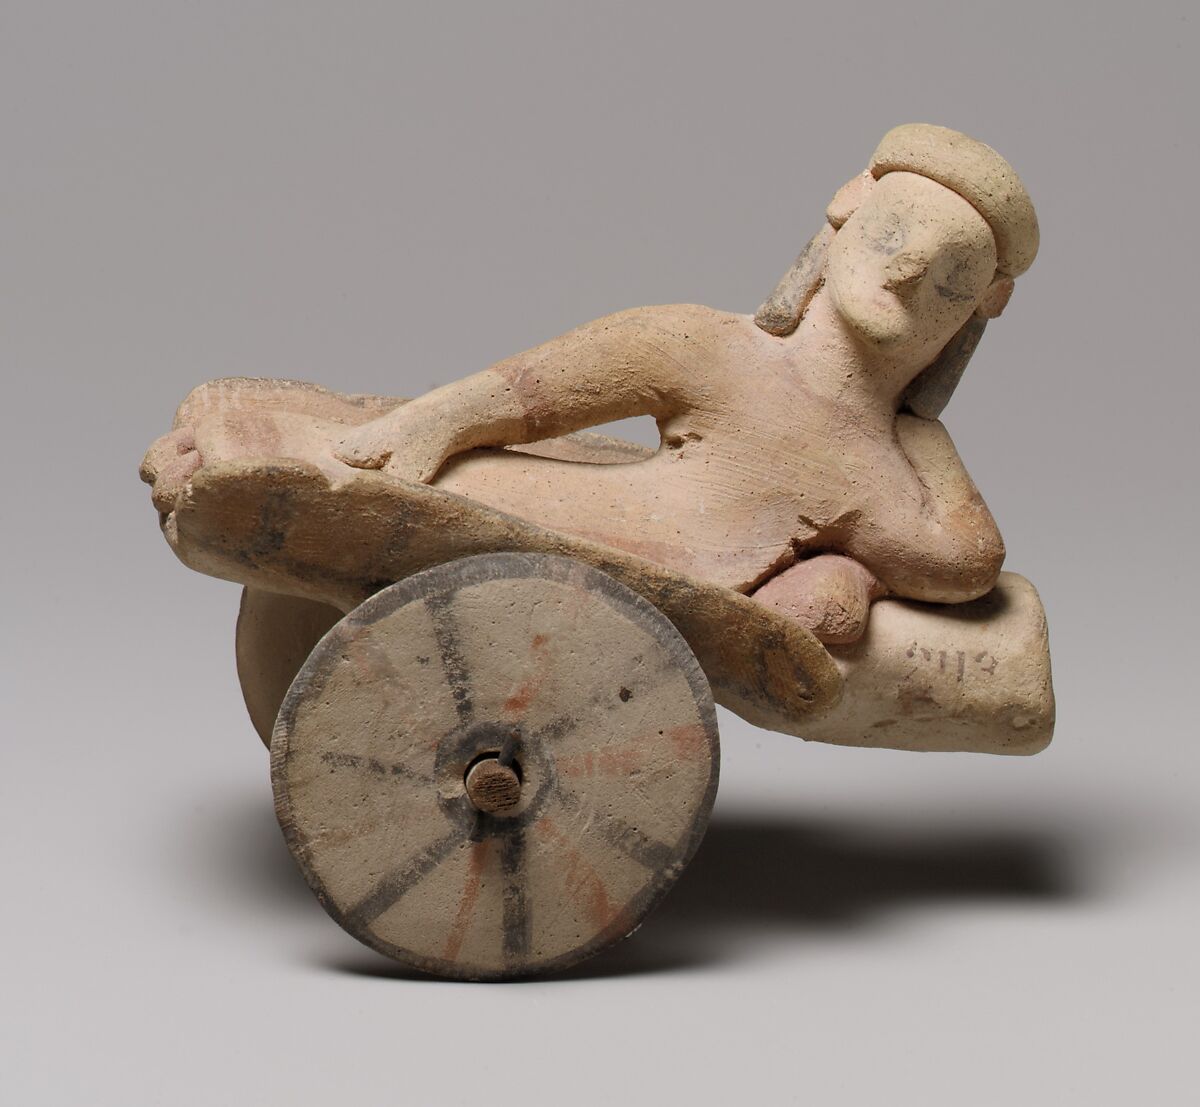 Model of a cart with a human figure, Terracotta, Cypriot 